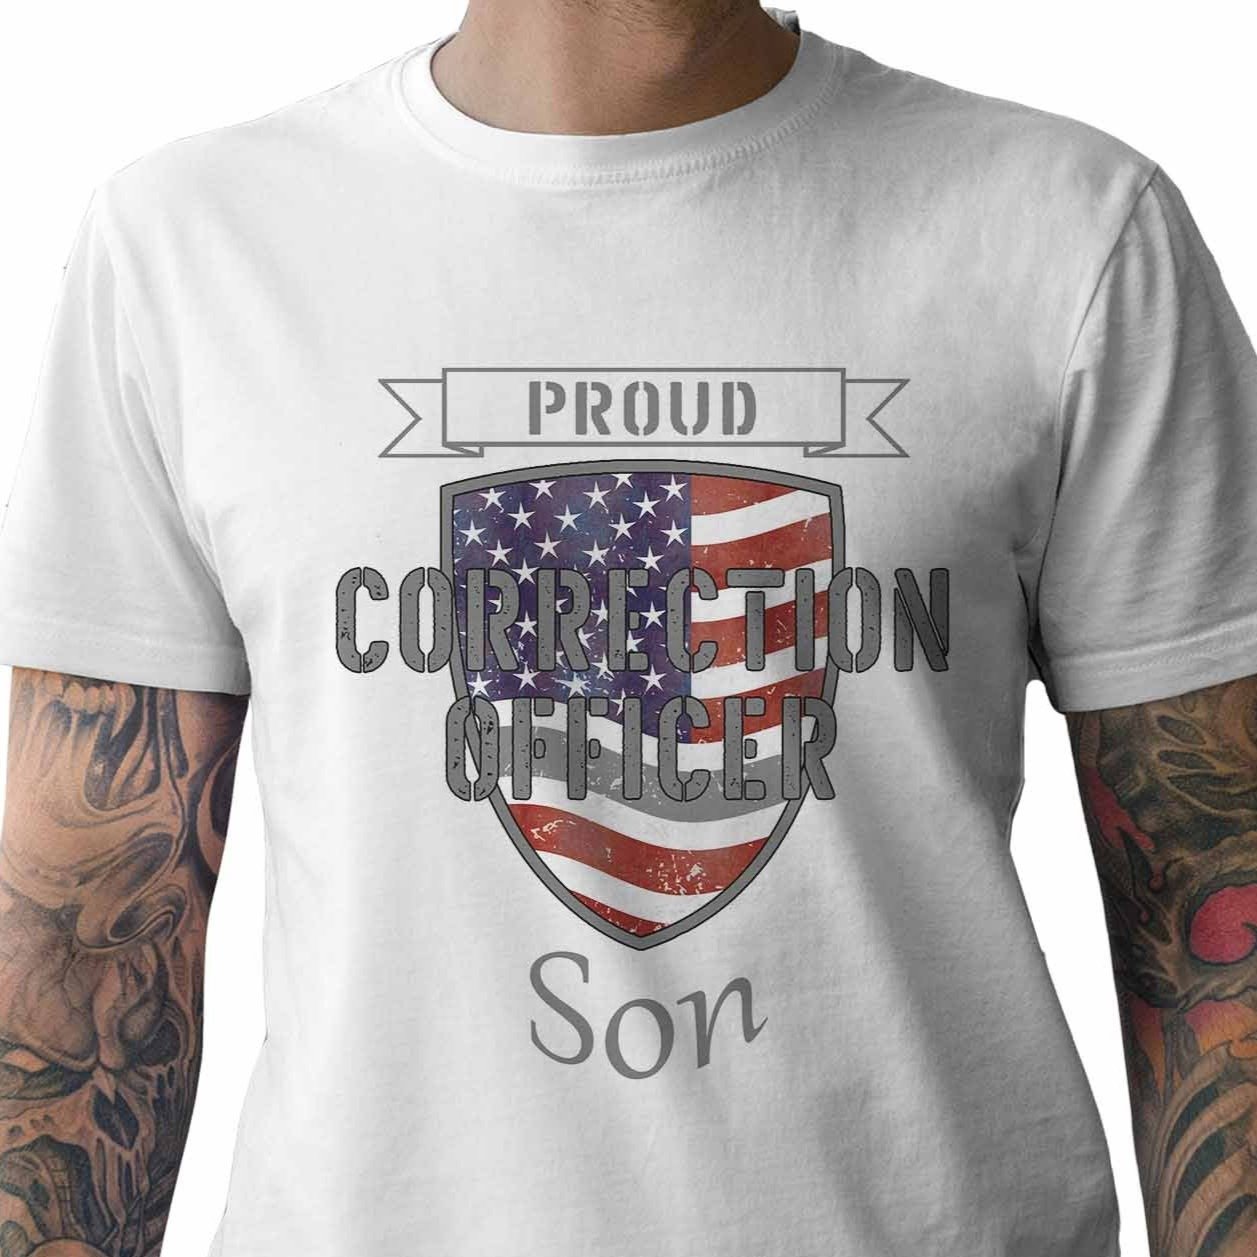 Proud Correction Officer Son - My Custom Tee Party